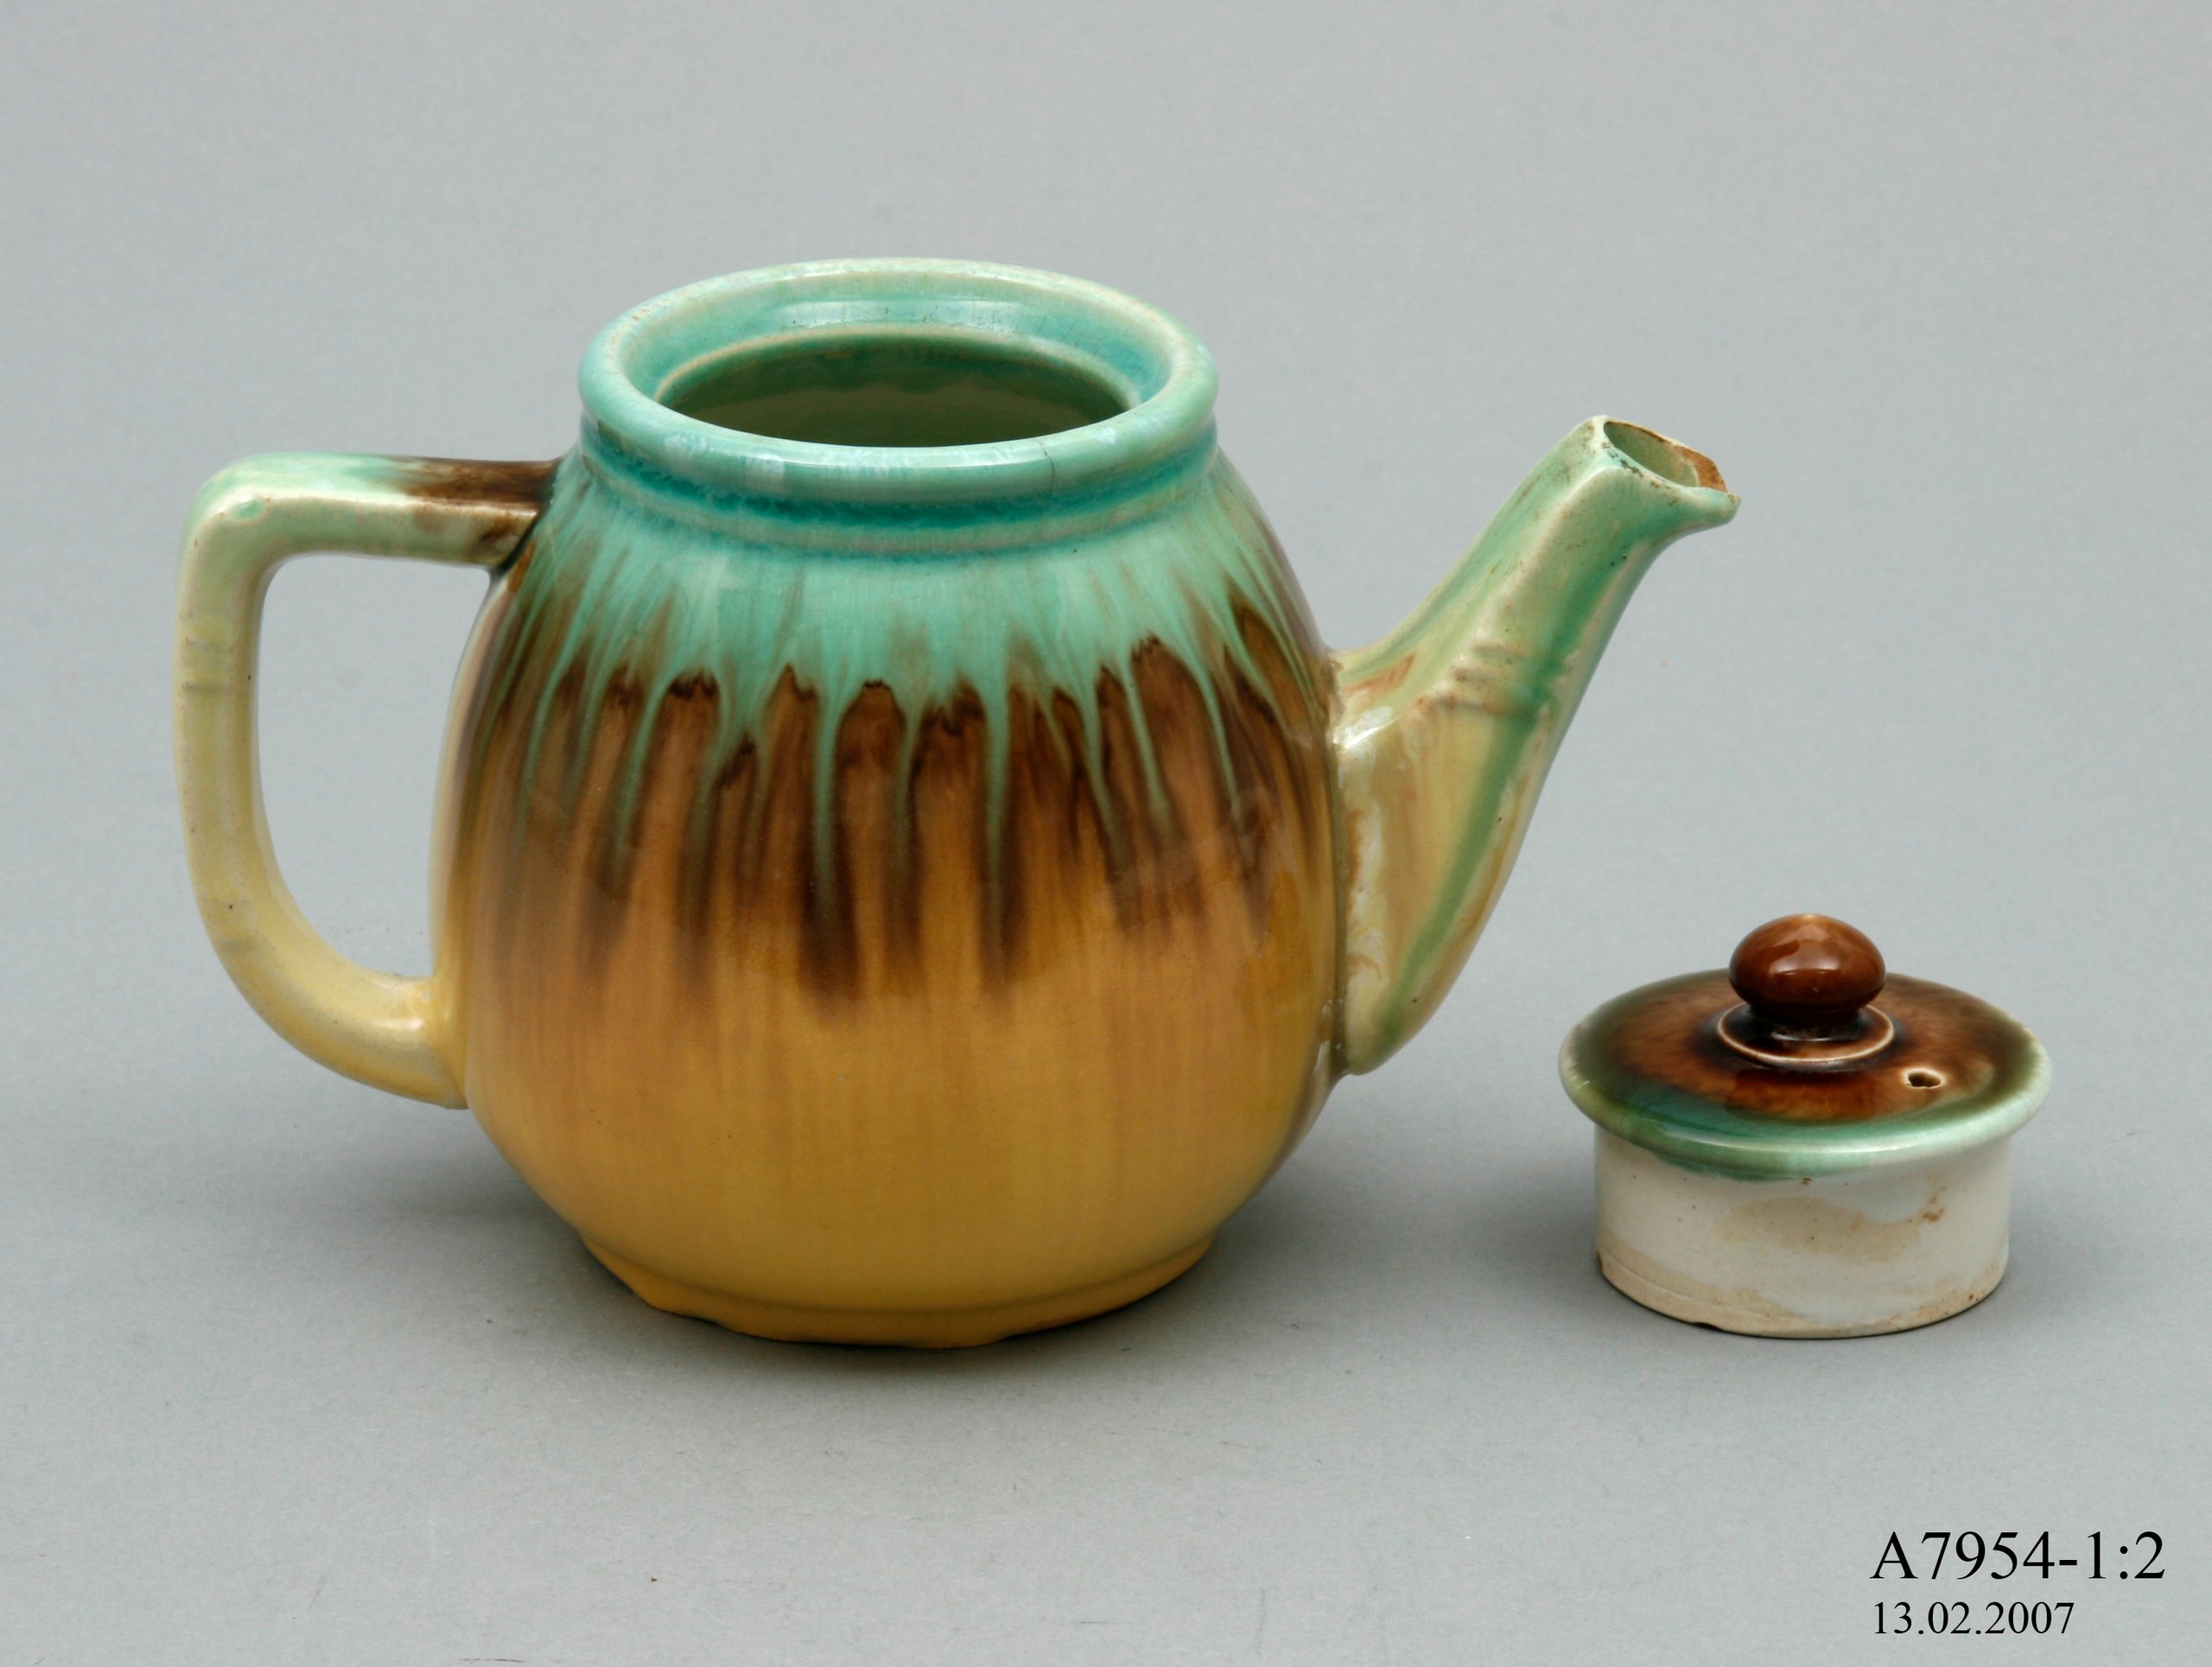 Teapot made by Bakewells from Sydney